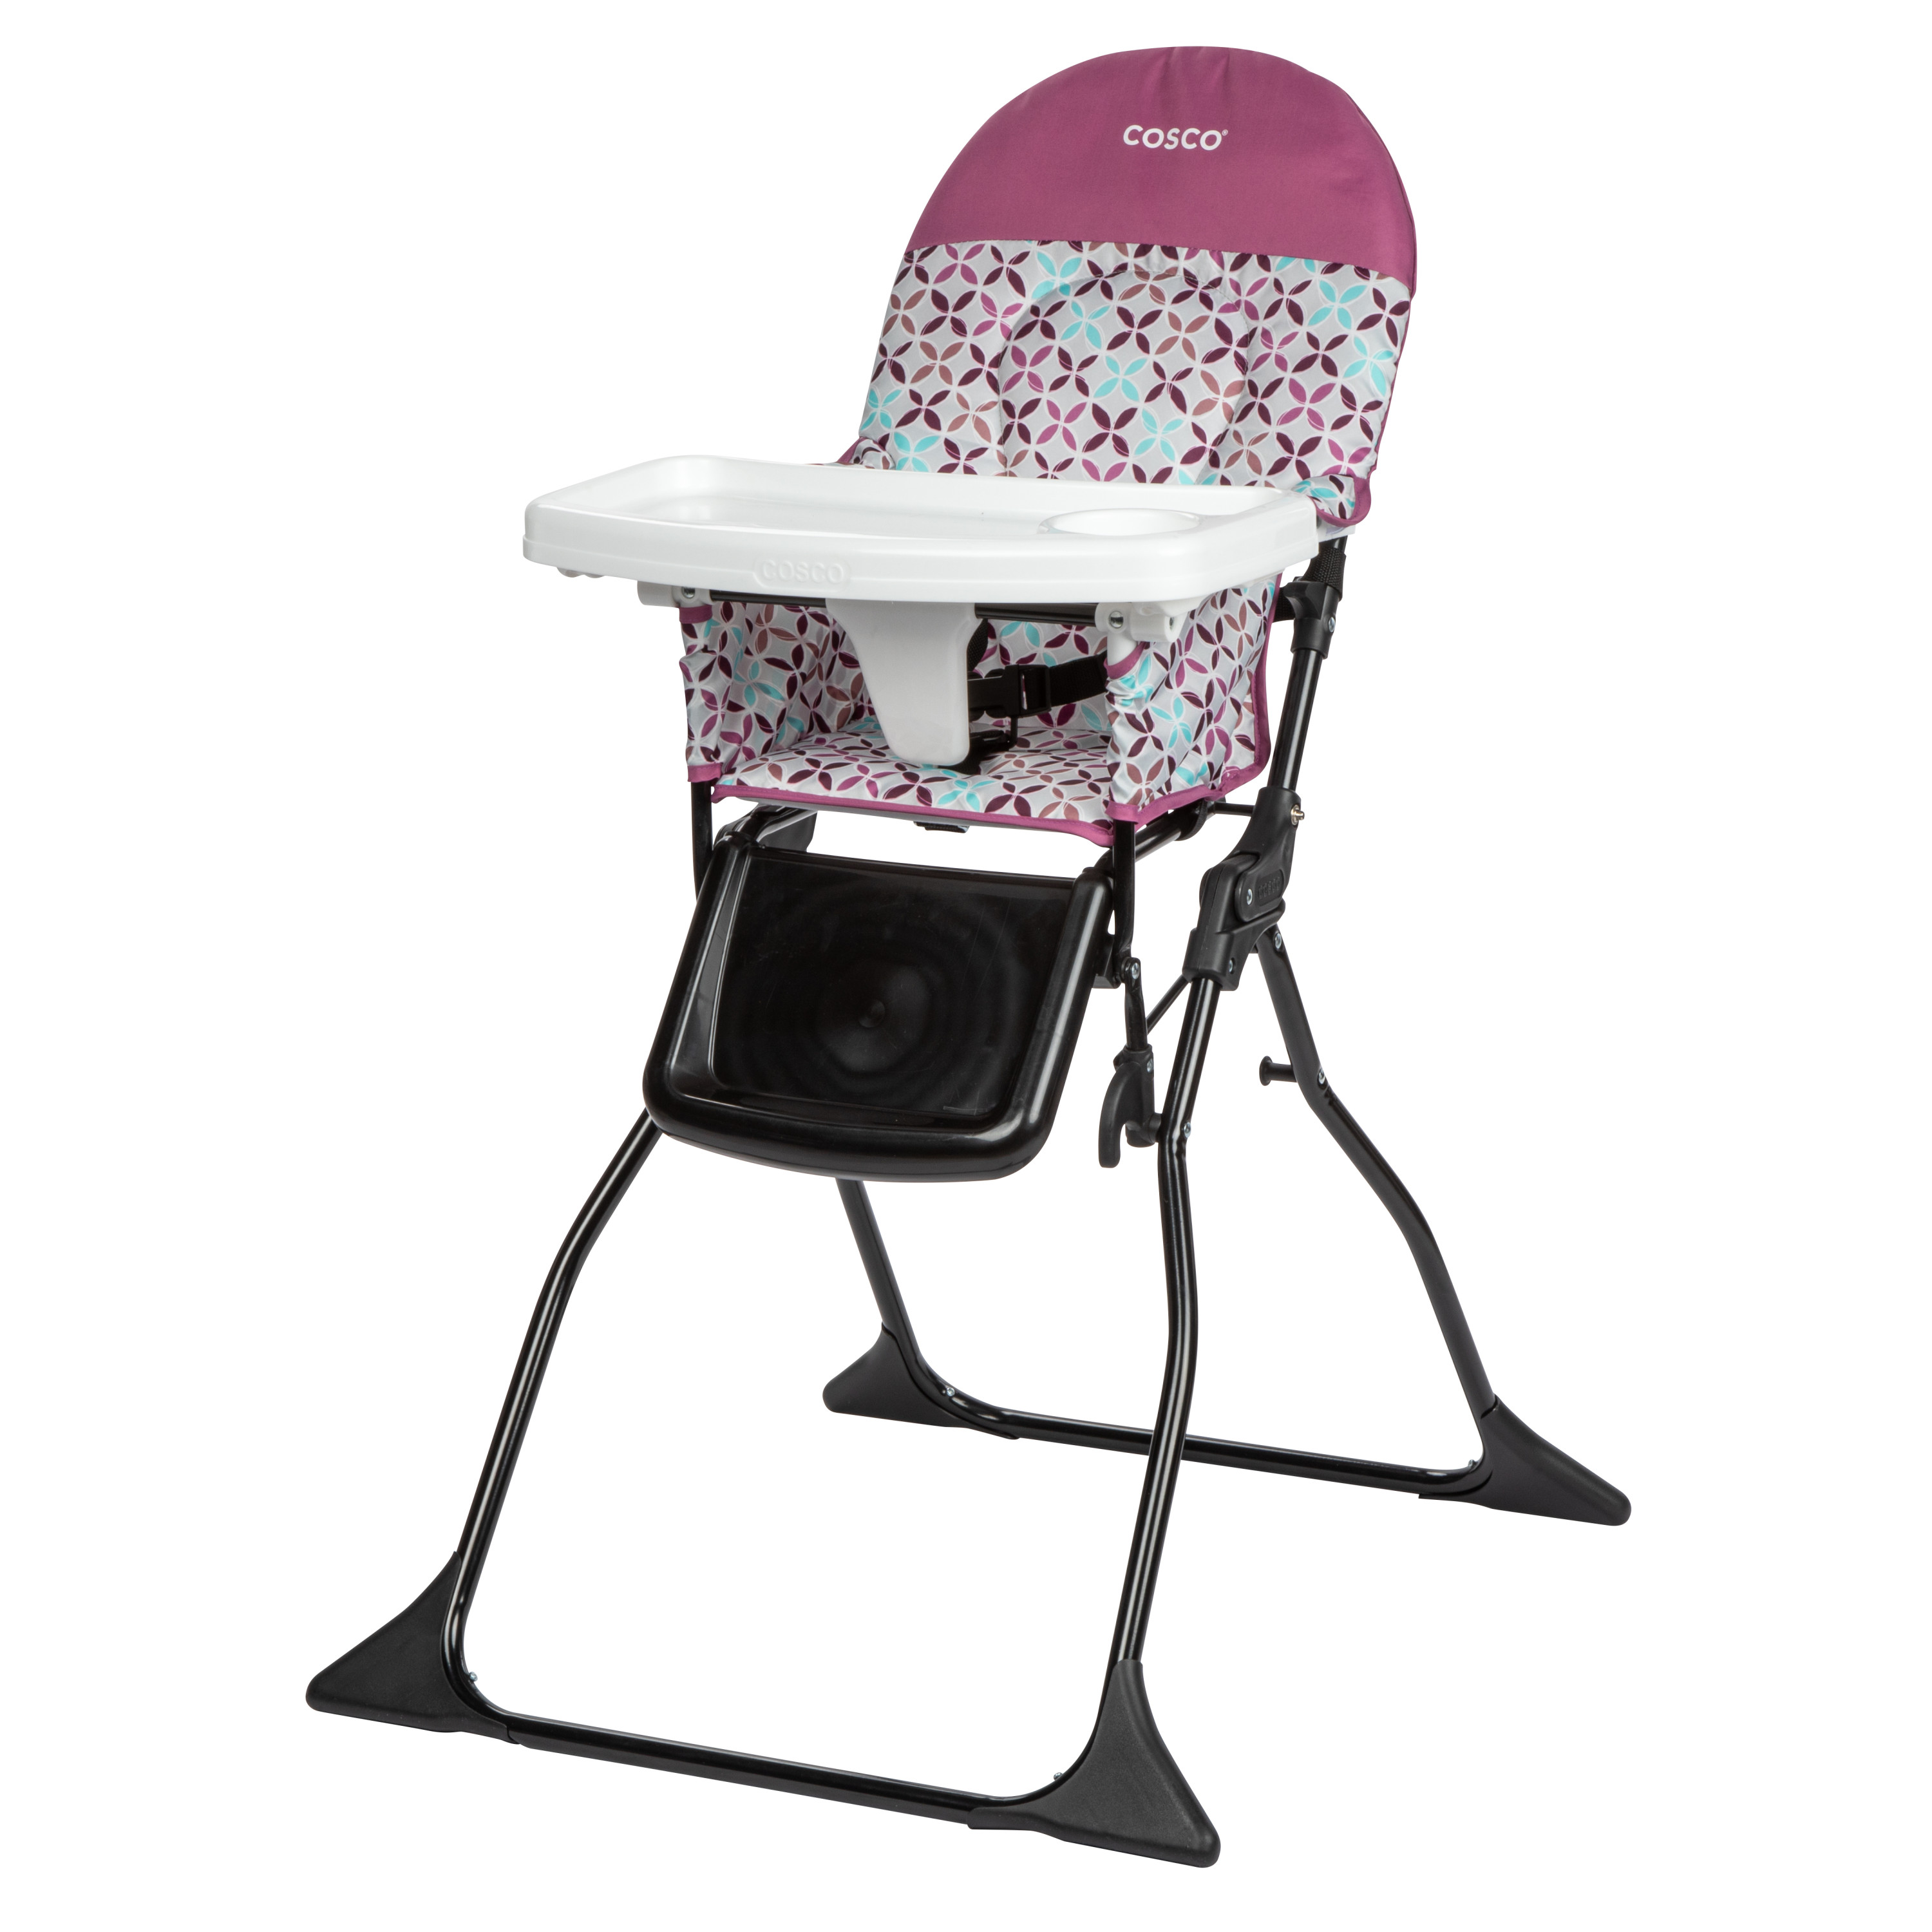 Cosco Kids Simple Fold Full Size High Chair with Adjustable Tray, Free Spirit Purple - image 1 of 16